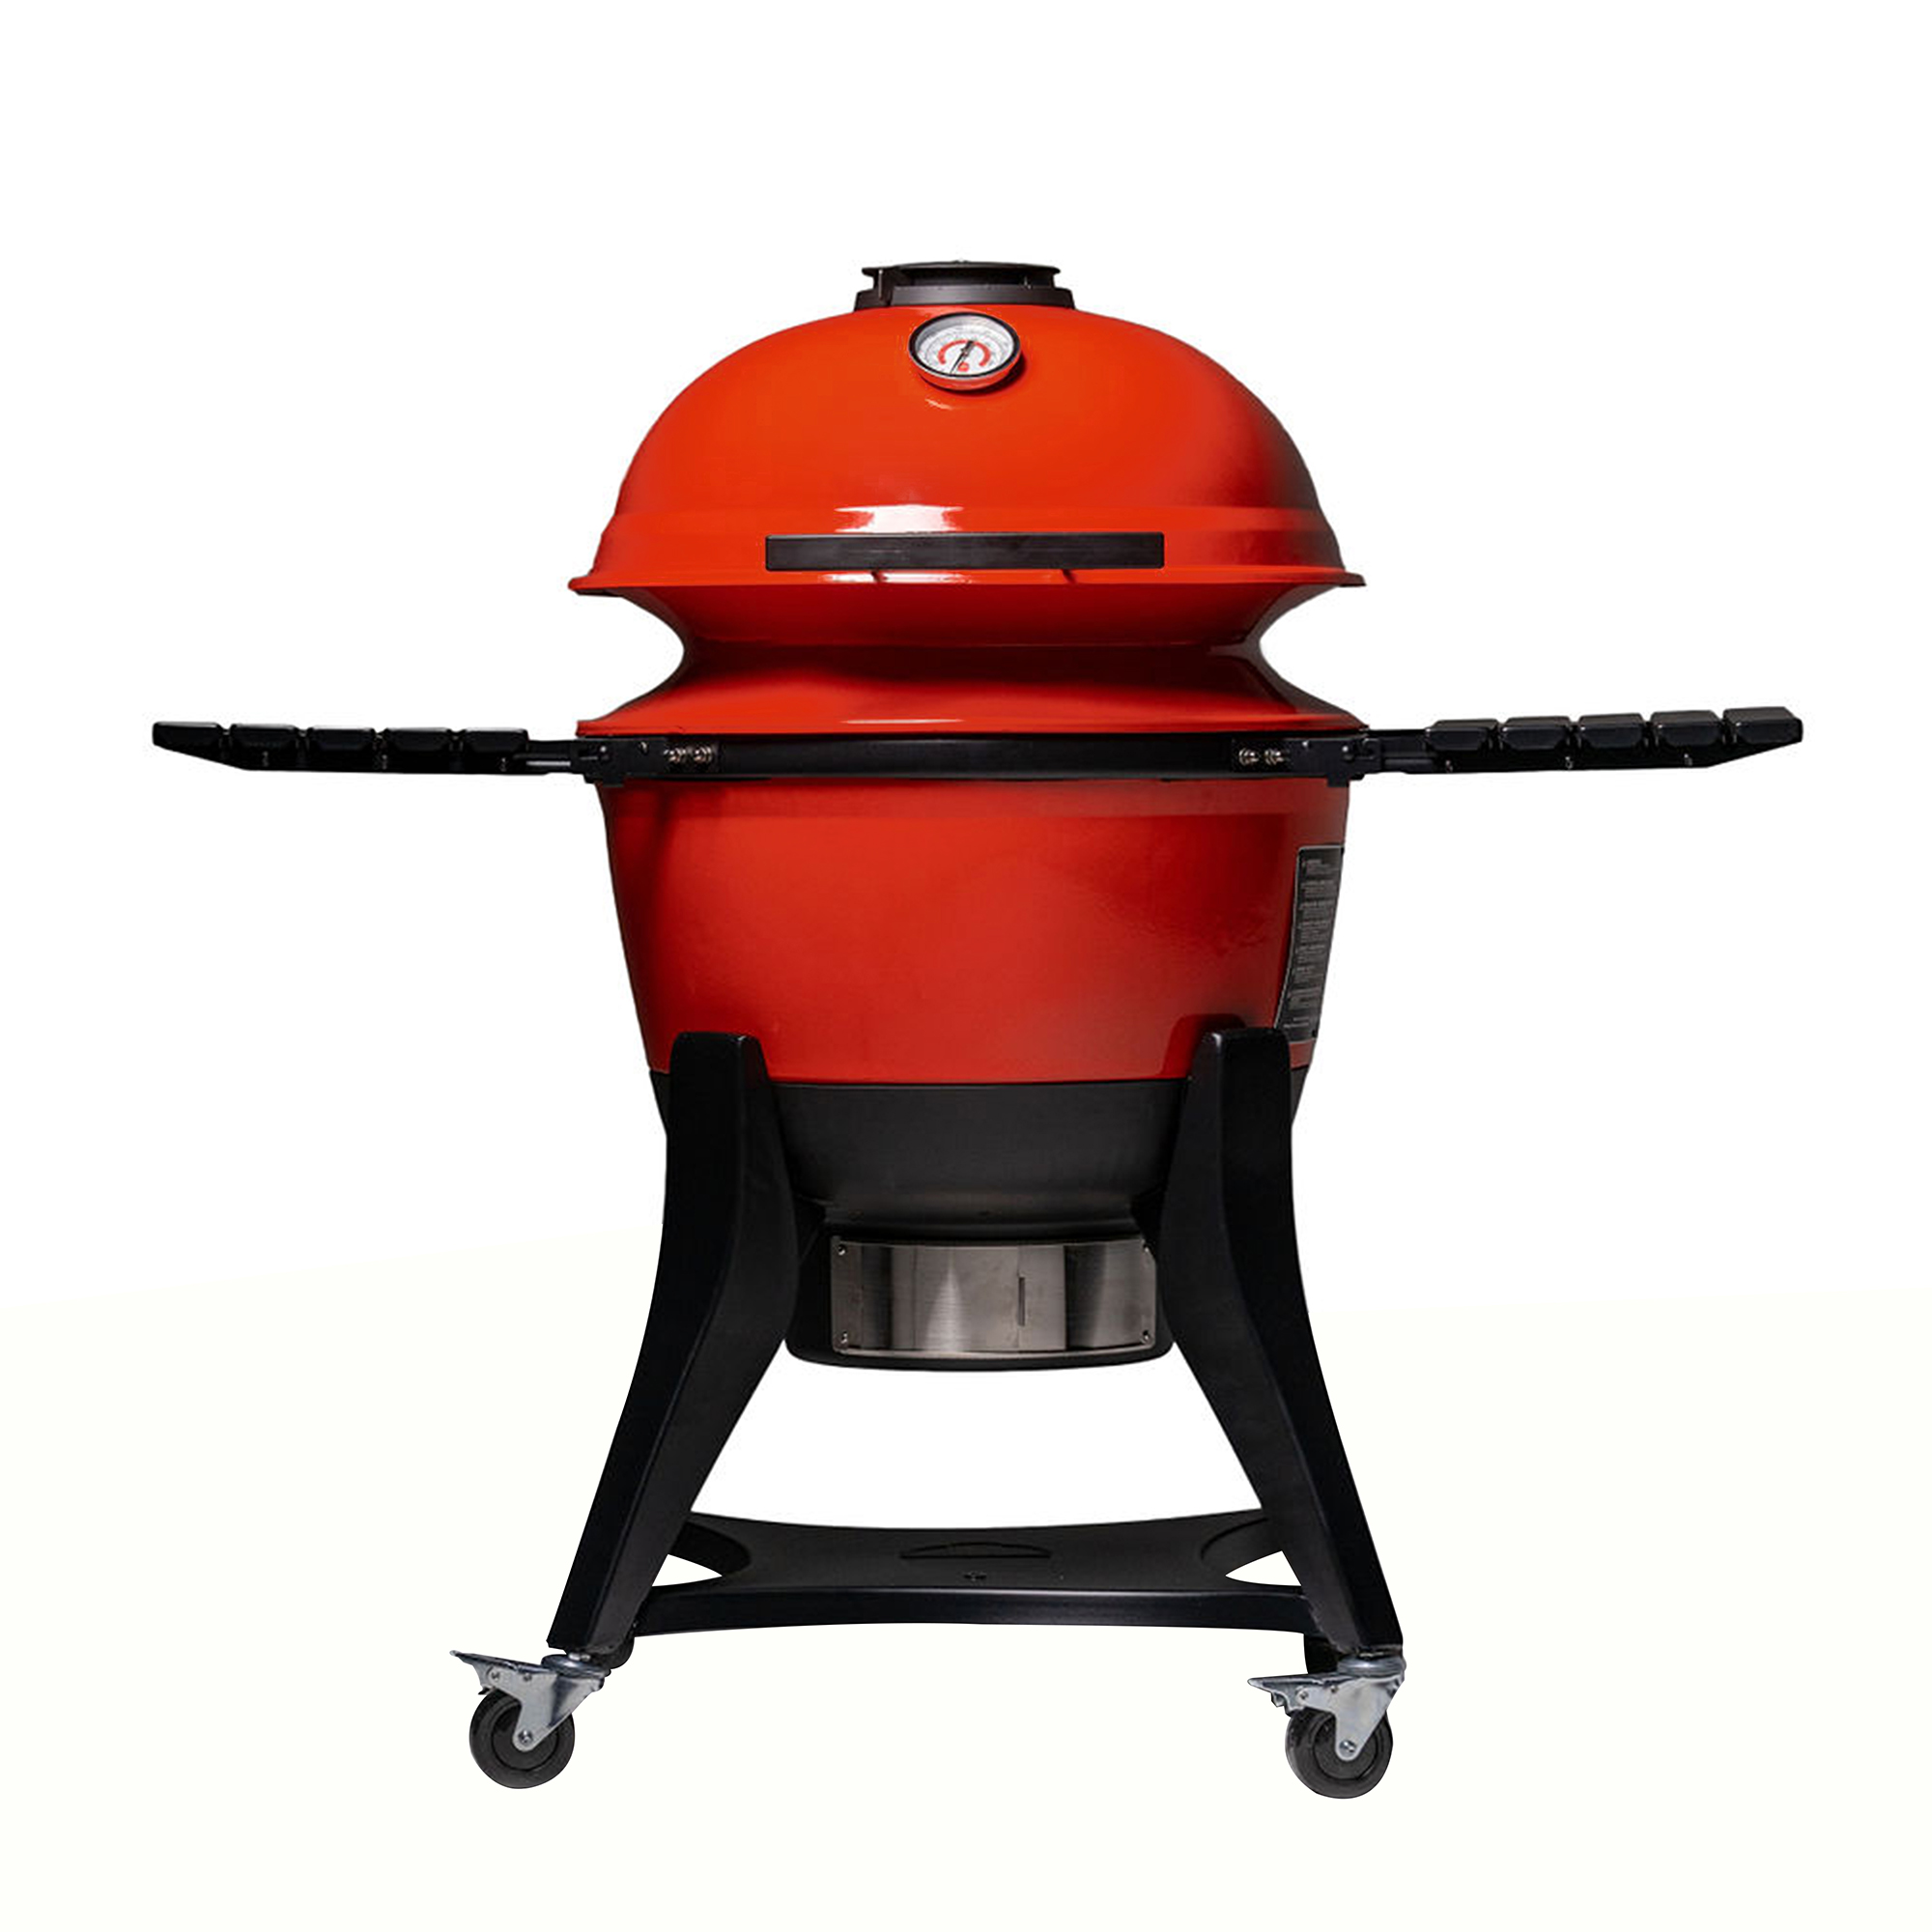 Kamado Joe Kettle Joe 22 in. Charcoal Grill in Red with Hinged Lid, Cart, and Side Shelves - image 1 of 12